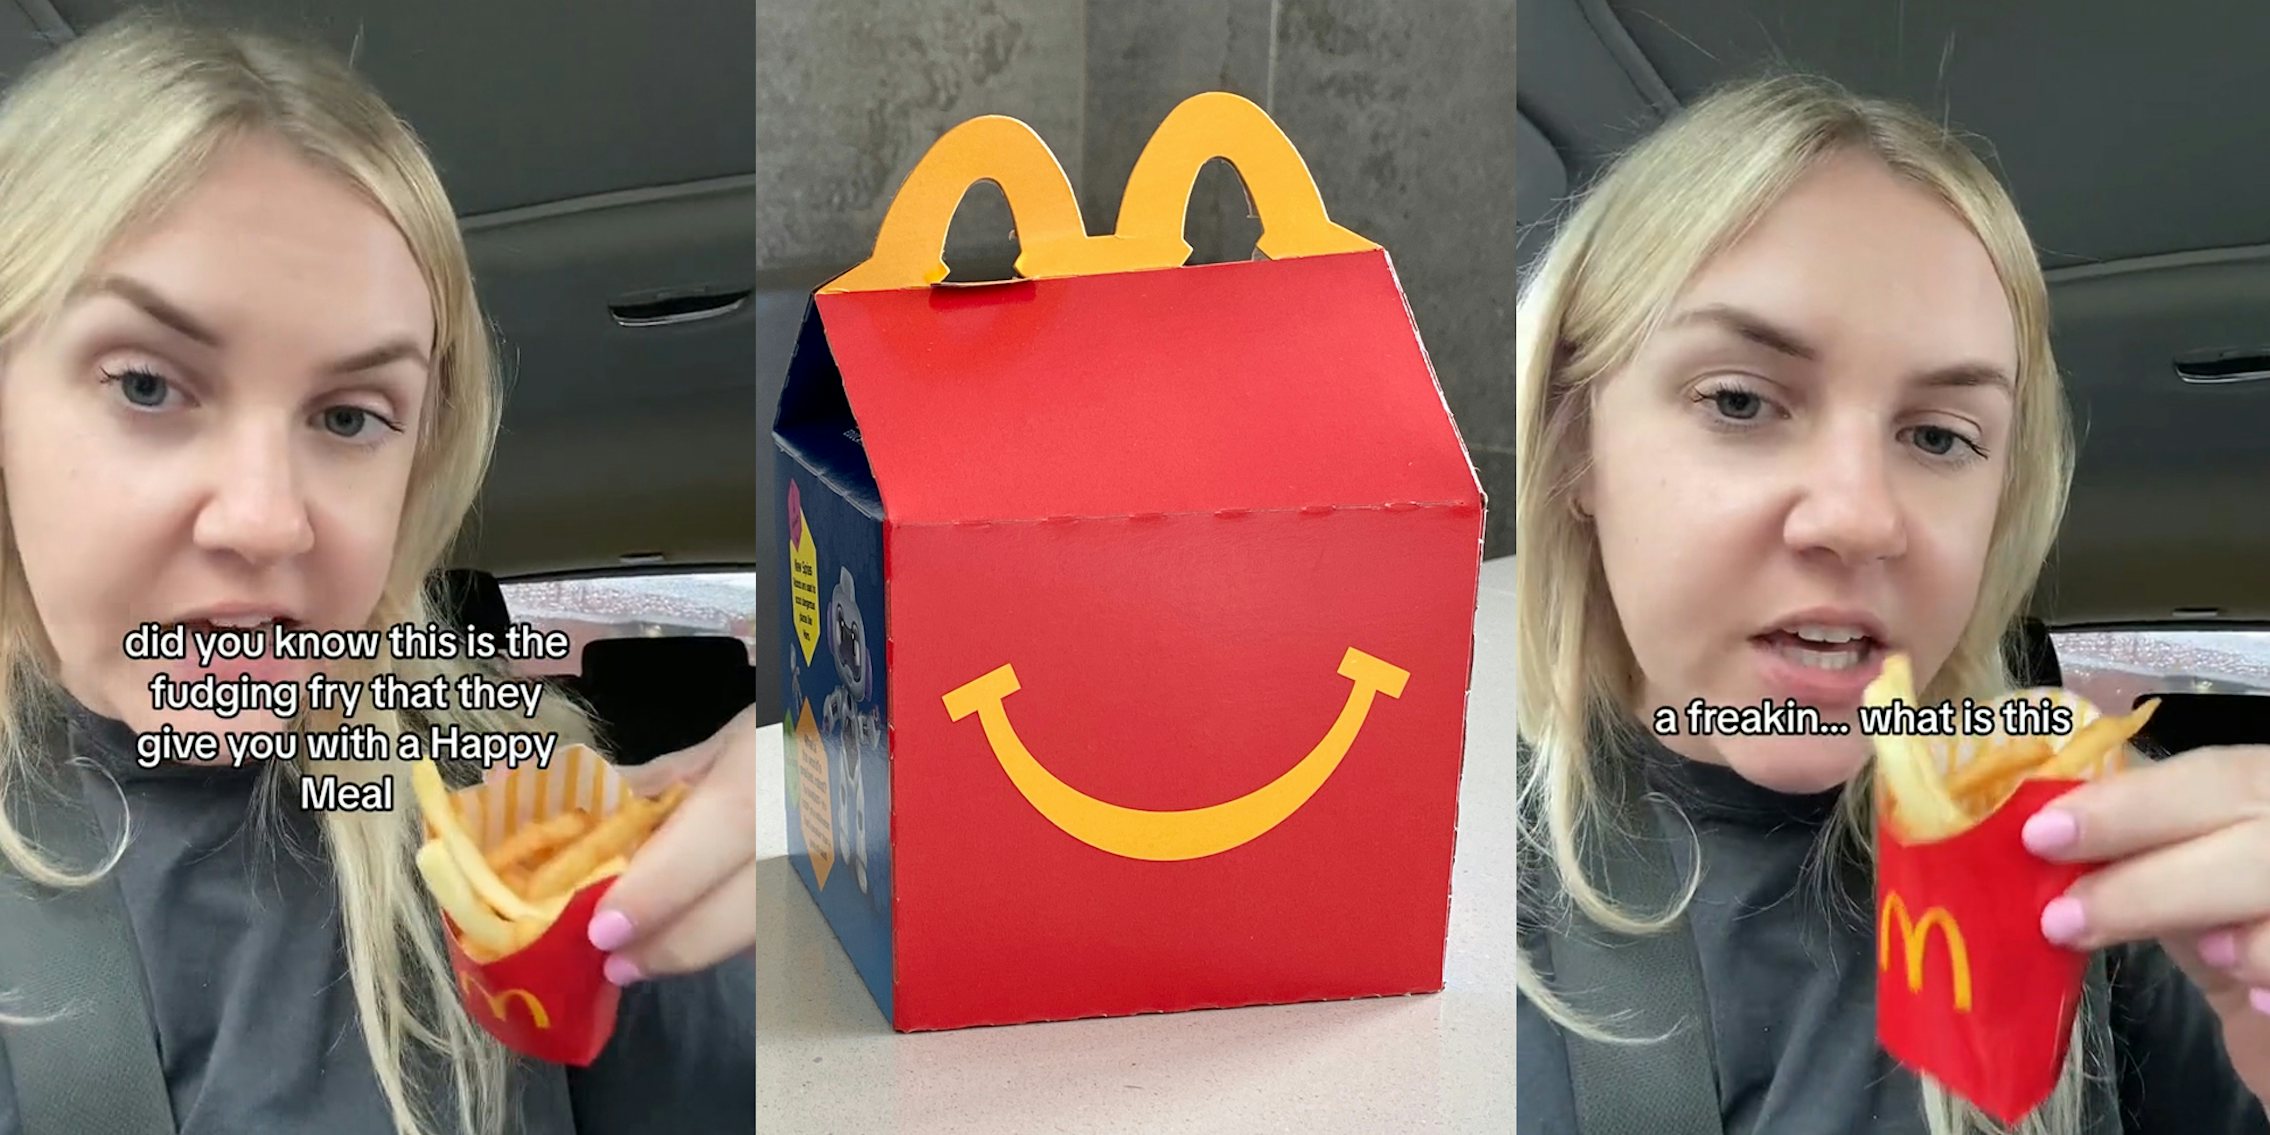 McDonald's customer holding Happy Meal fries in car with caption 'did you know this is the fudging fry that they give you with a Happy Meal' (l) McDonald's Happy Meal on table (c) McDonald's customer holding Happy Meal fries in car with caption 'a freakin...what is this' (r)